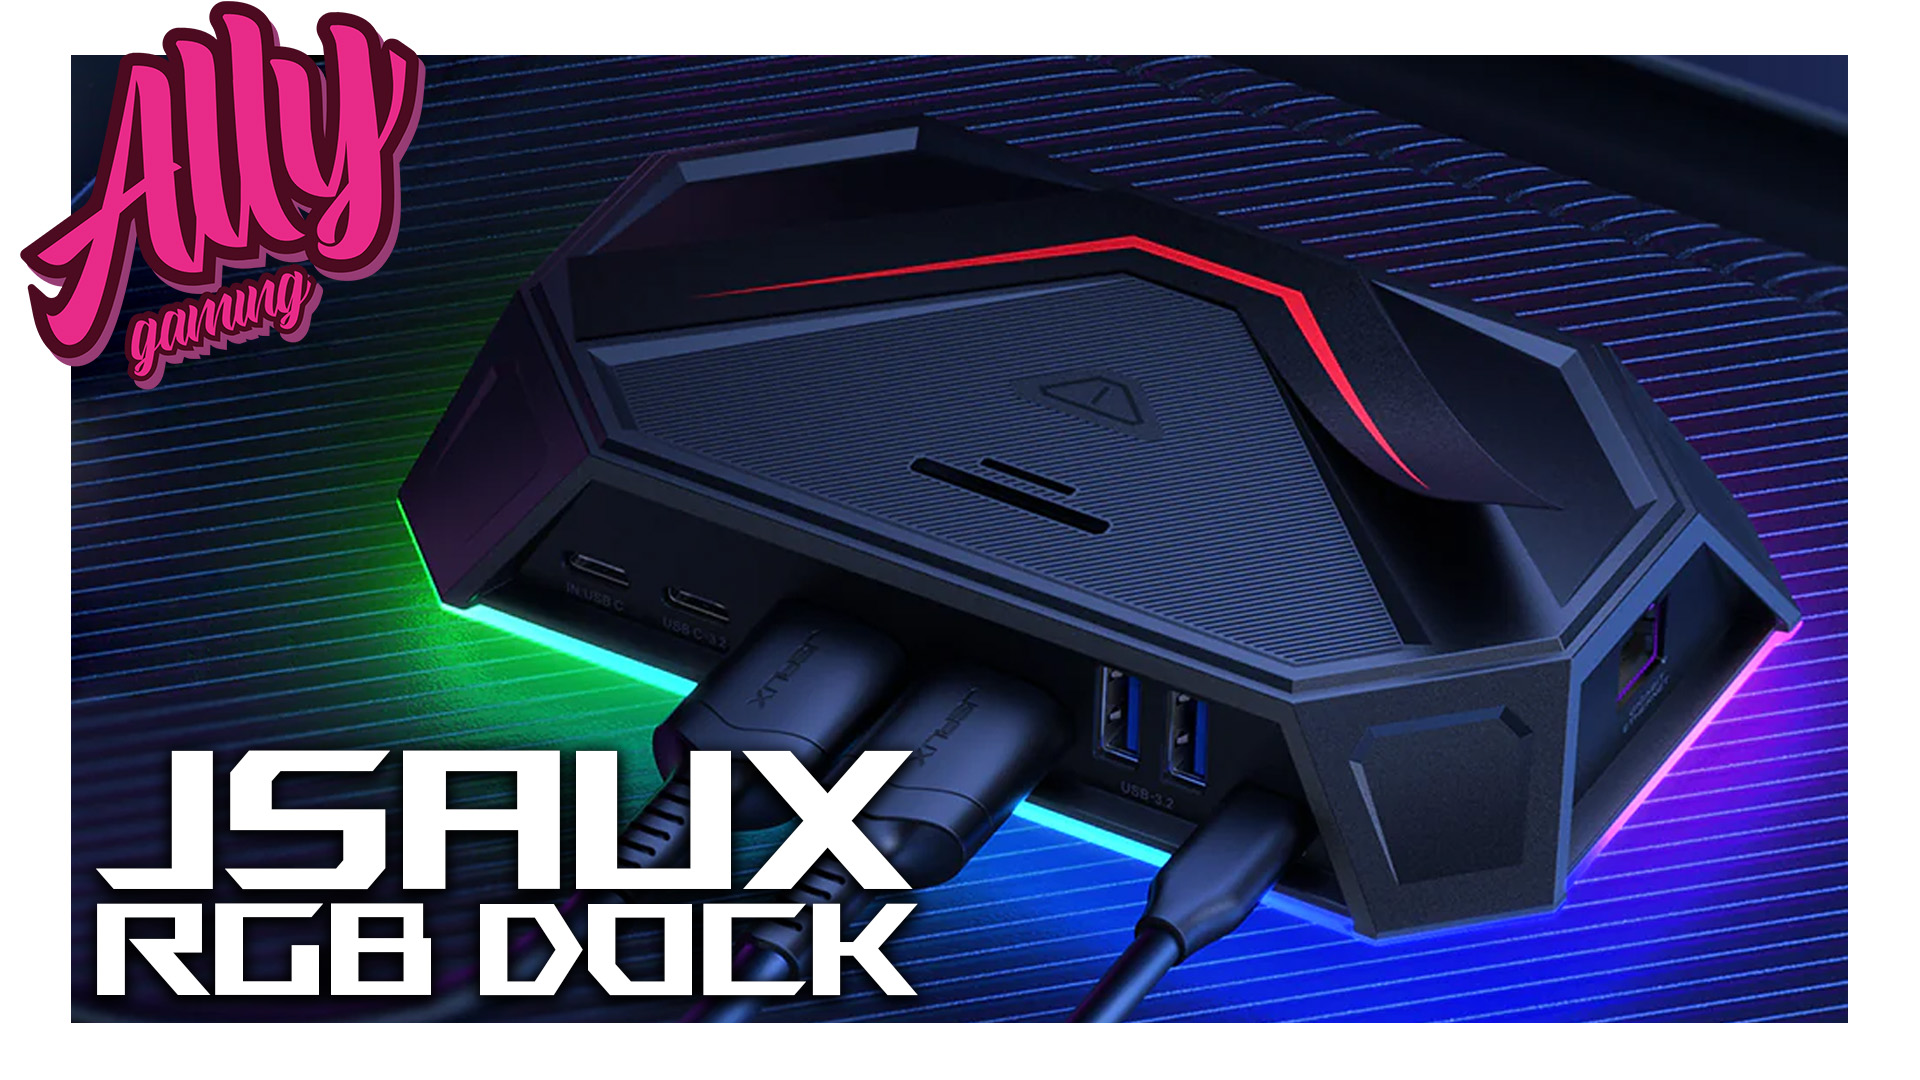 The Best Dock For The ROG Ally JSAUX 12 in 1 RGB Dock